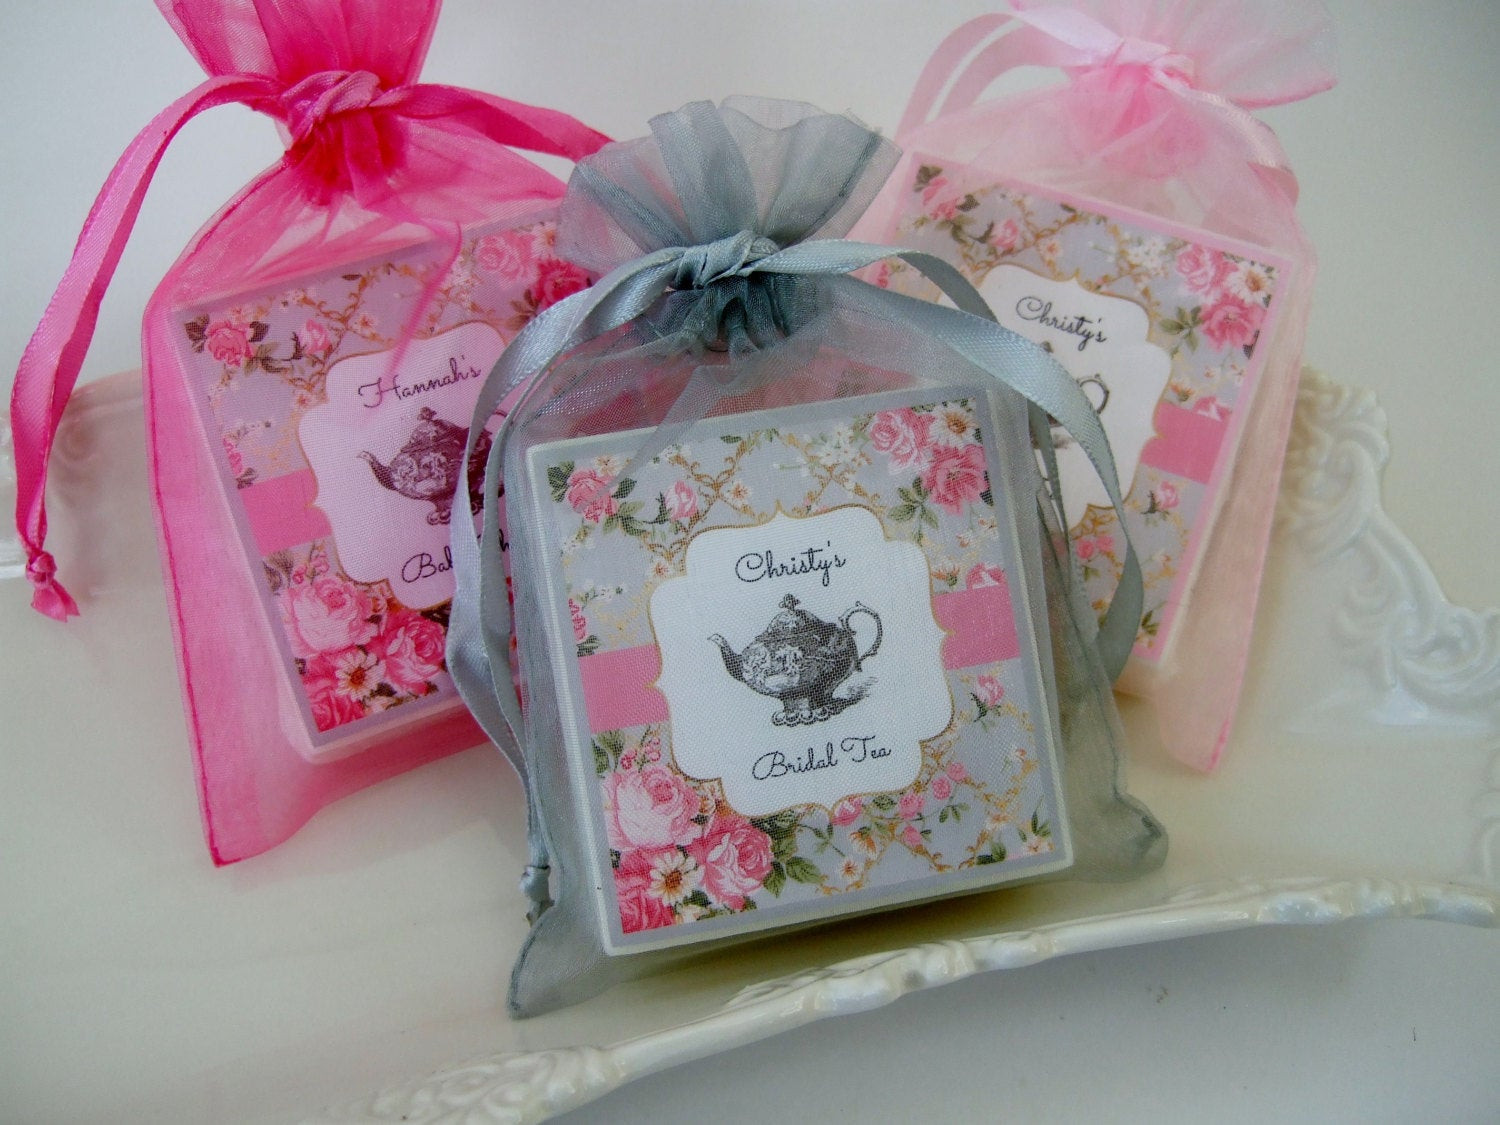 Tea Party Birthday Supplies
 Tea Party Bridal Shower Favors Baby shower favors set of